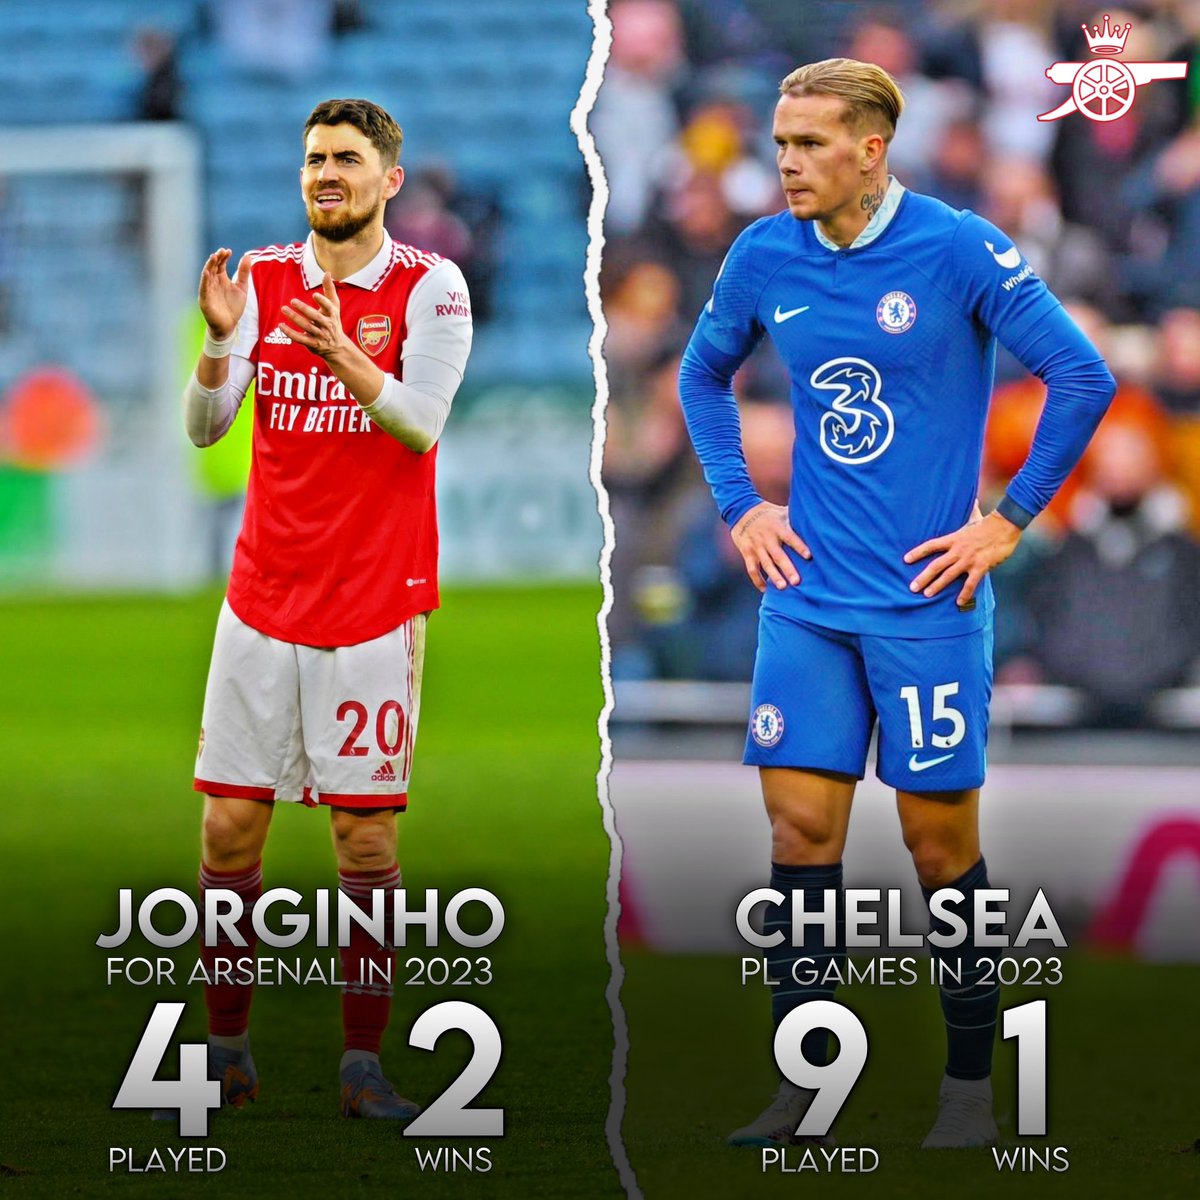 Jorginho has more PL wins for Arsenal than Chelsea have in 2023. Switched to the better side of London 😉

#afc